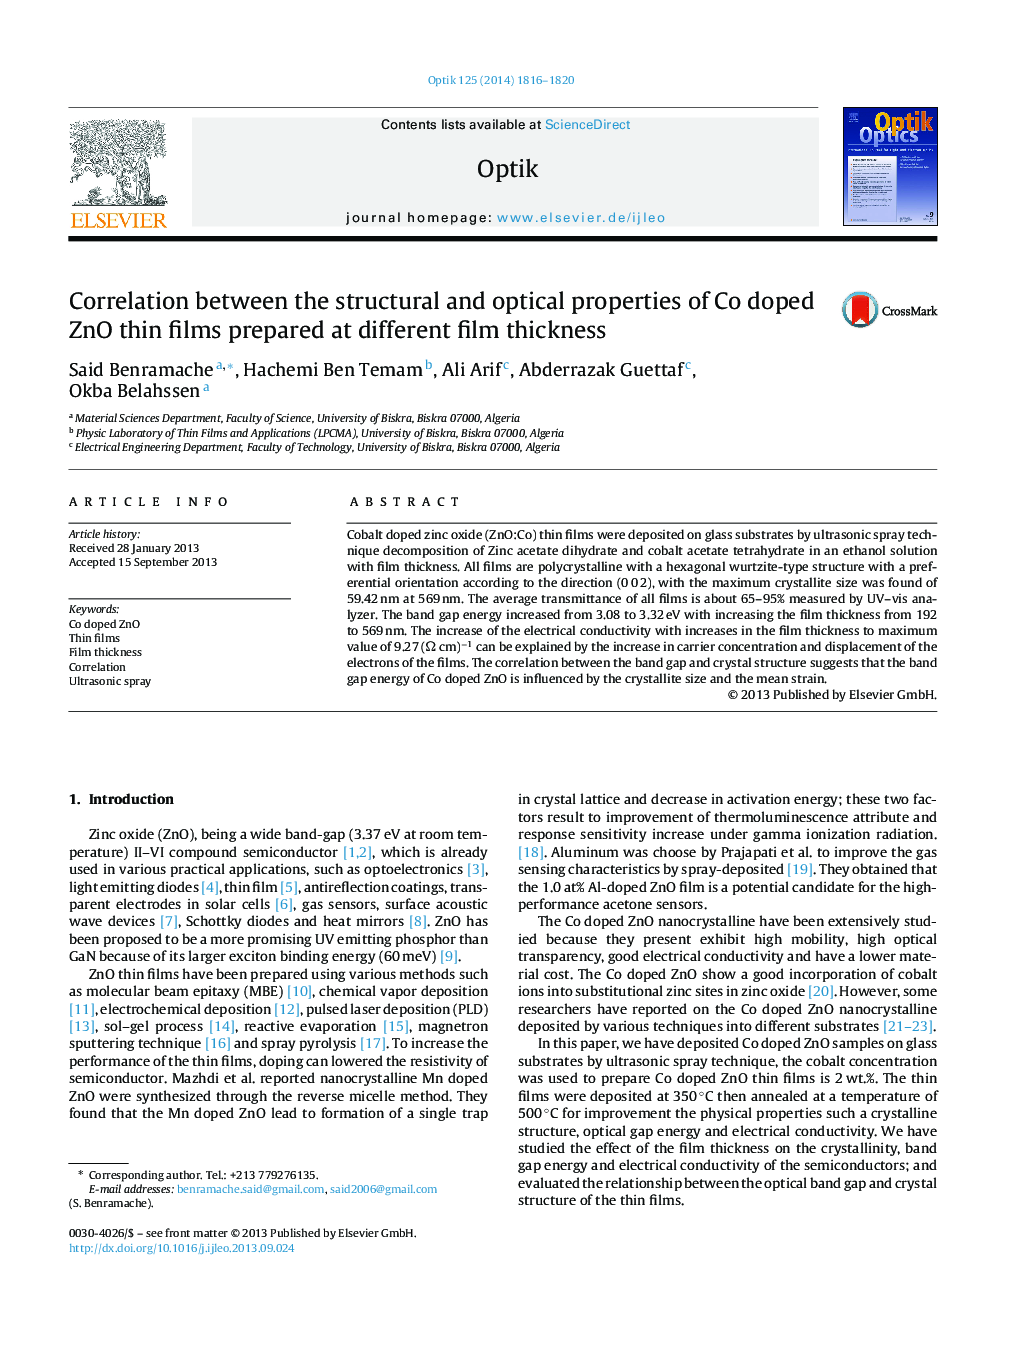 Correlation between the structural and optical properties of Co doped ZnO thin films prepared at different film thickness